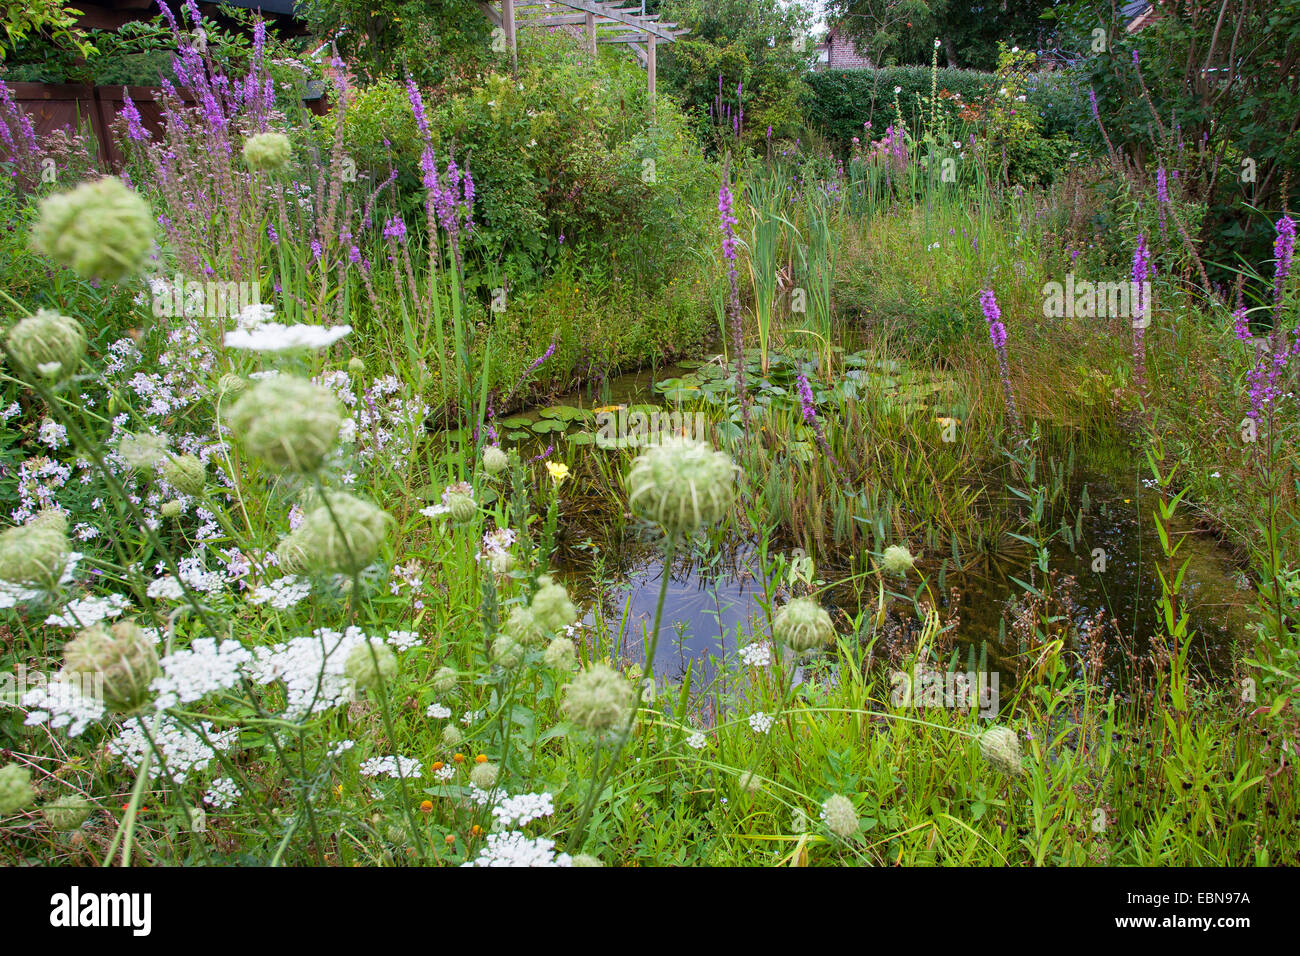 pool in a natural garden, Germany Stock Photo